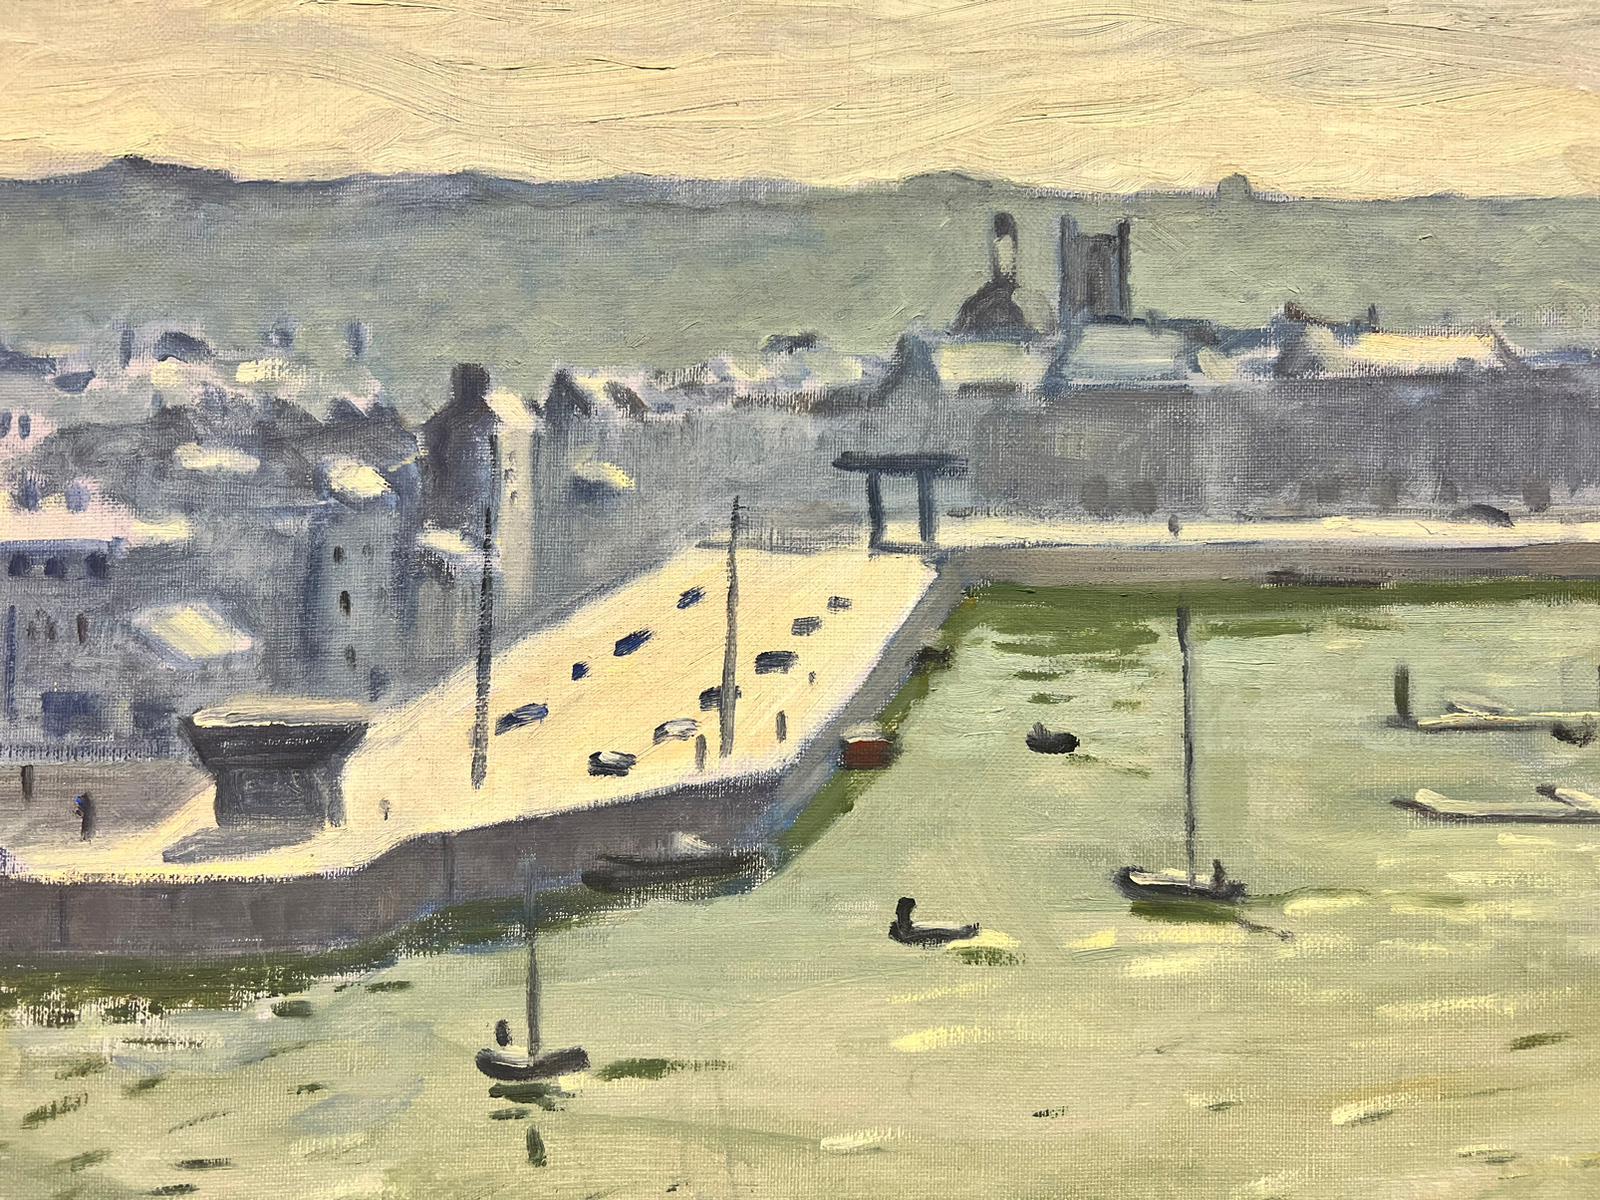 Dieppe Harbour
by Guy Pichon (1933-2007)
oil on canvas, unframed
signed 
canvas: 21 x 26 inches

provenance: private collection, France 
The painting is in very good and presentable condition.
